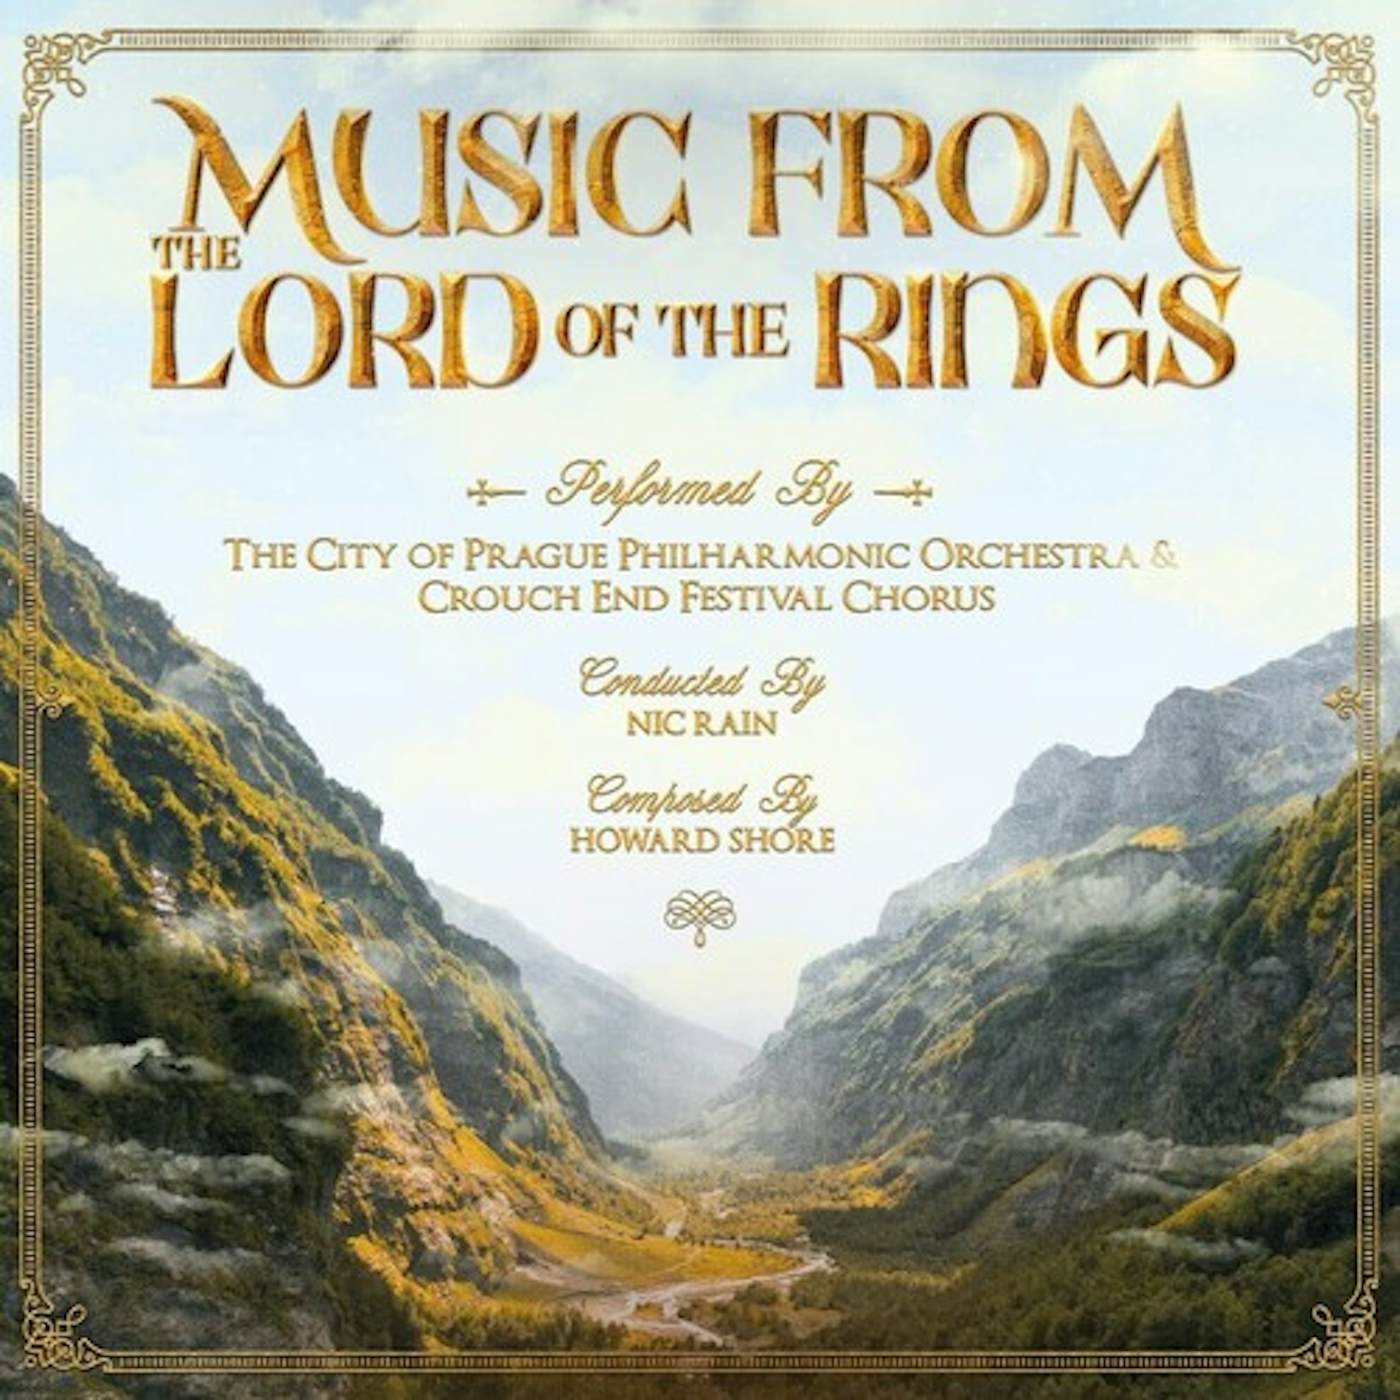 The City of Prague Philharmonic Orchestra LORD OF THE RINGS Vinyl Record